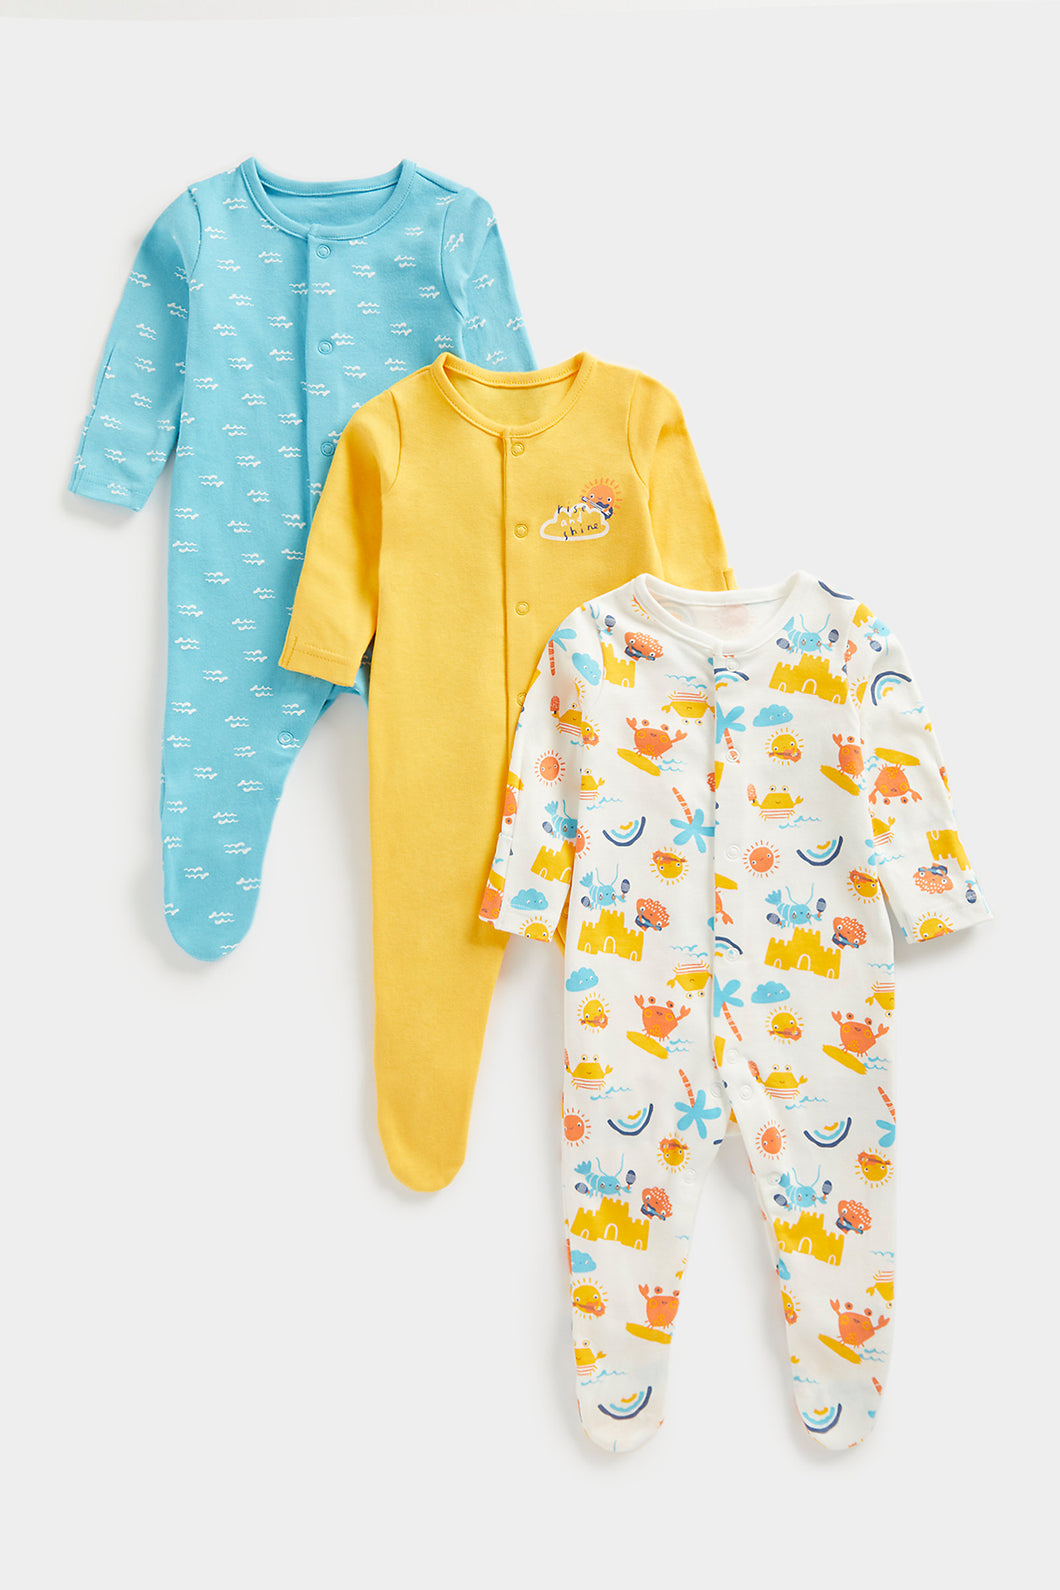 Mothercare Seaside Band Sleepsuits - 3 Pack